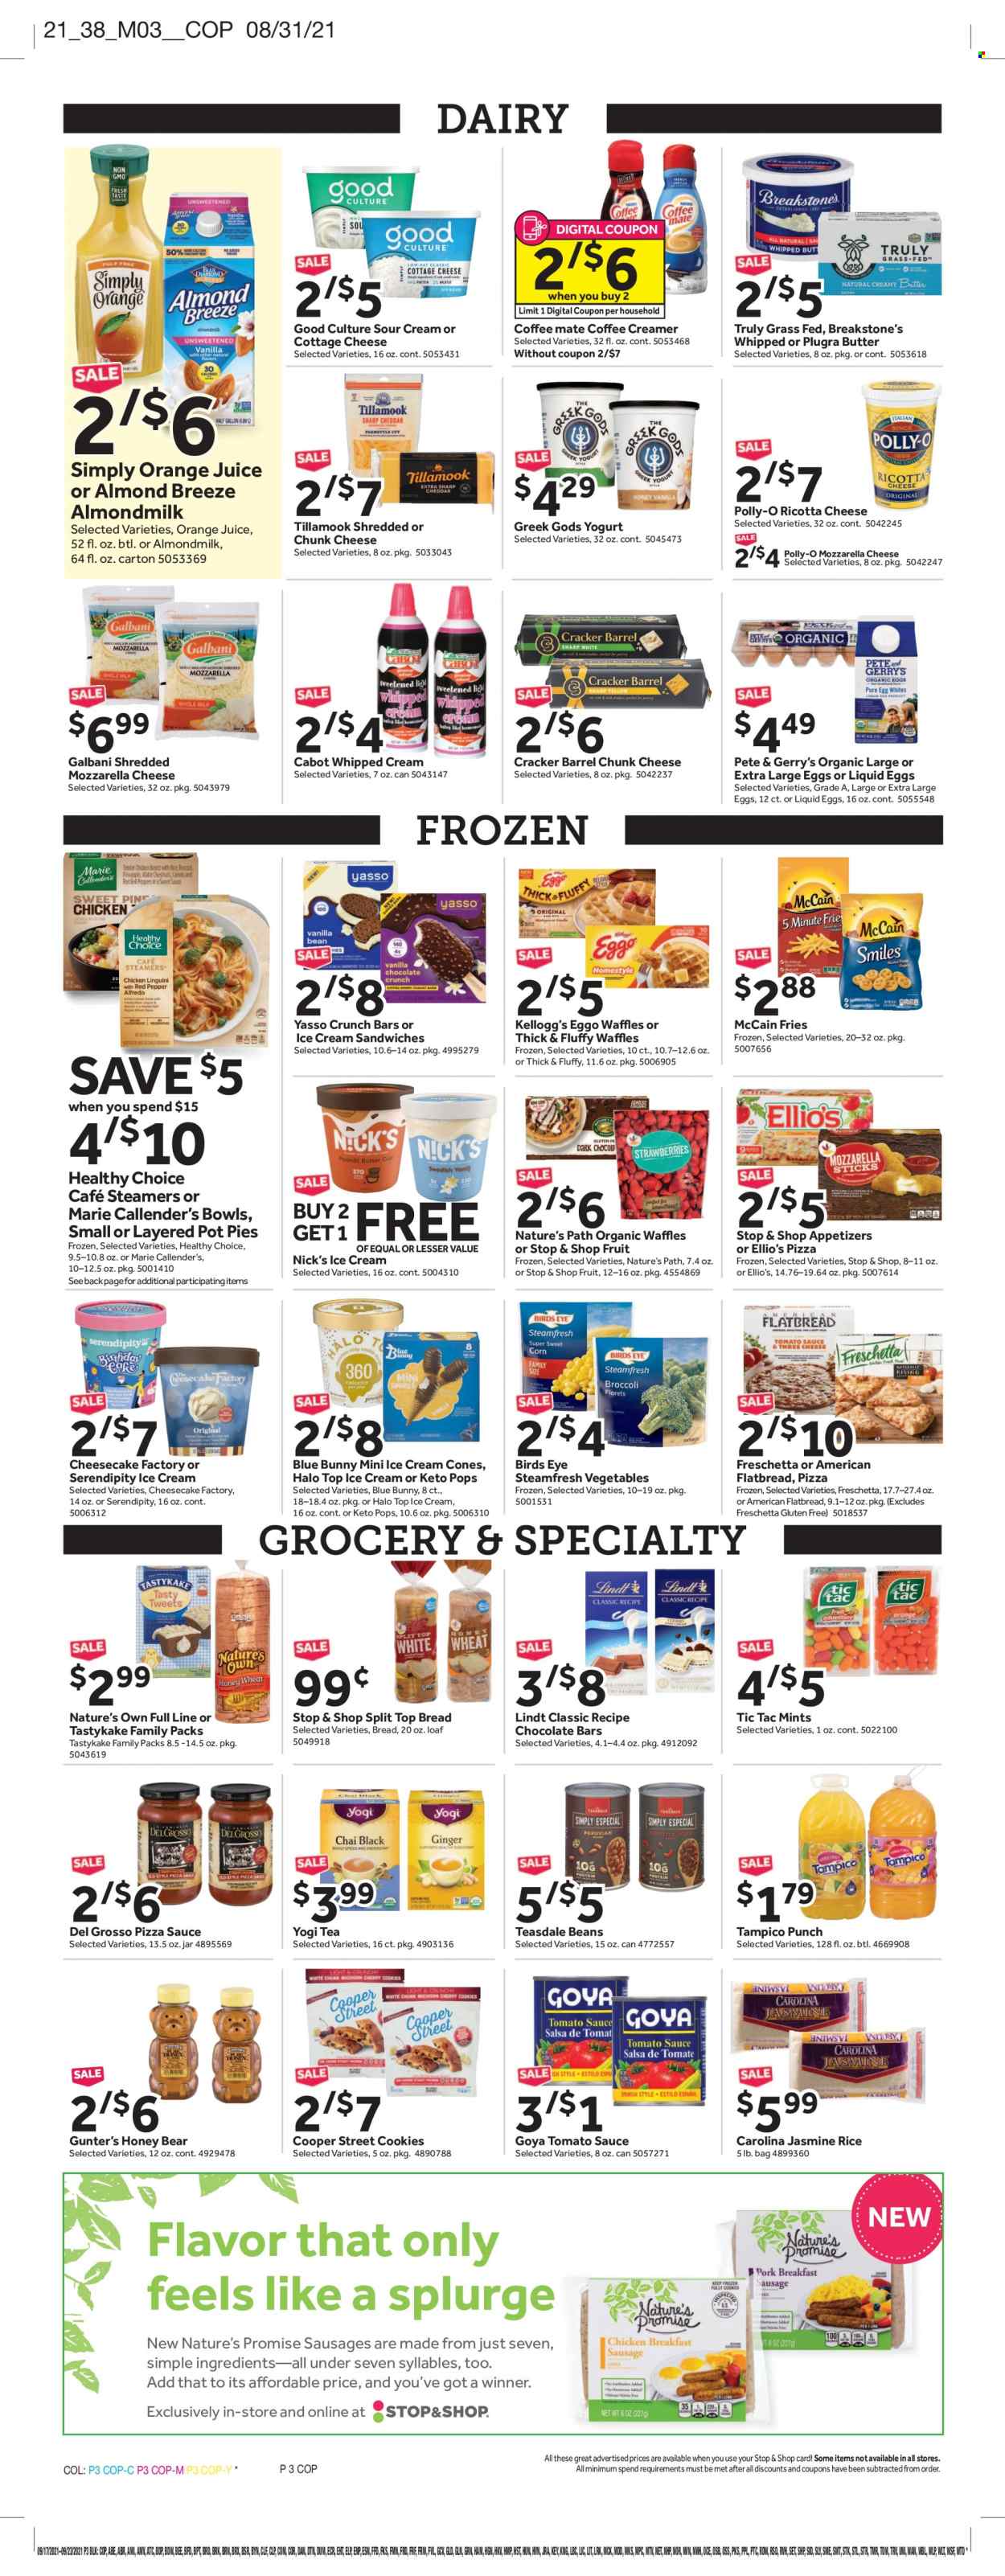 thumbnail - Stop & Shop Flyer - 09/17/2021 - 09/23/2021 - Sales products - Nature’s Promise, flatbread, pot pie, Bird's Eye, Healthy Choice, Marie Callender's, ham, sausage, cottage cheese, ricotta, Galbani, chunk cheese, yoghurt, almond milk, Almond Breeze, large eggs, butter, sour cream, whipped cream, creamer, ice cream sandwich, Nick's Ice Cream, Blue Bunny, McCain, potato fries, cookies, Lindt, crackers, Kellogg's, Tic Tac, chocolate bar, tomato sauce, Goya, rice, jasmine rice, honey, orange juice, juice, fruit punch, tea, TRULY, Nature's Own. Page 3.